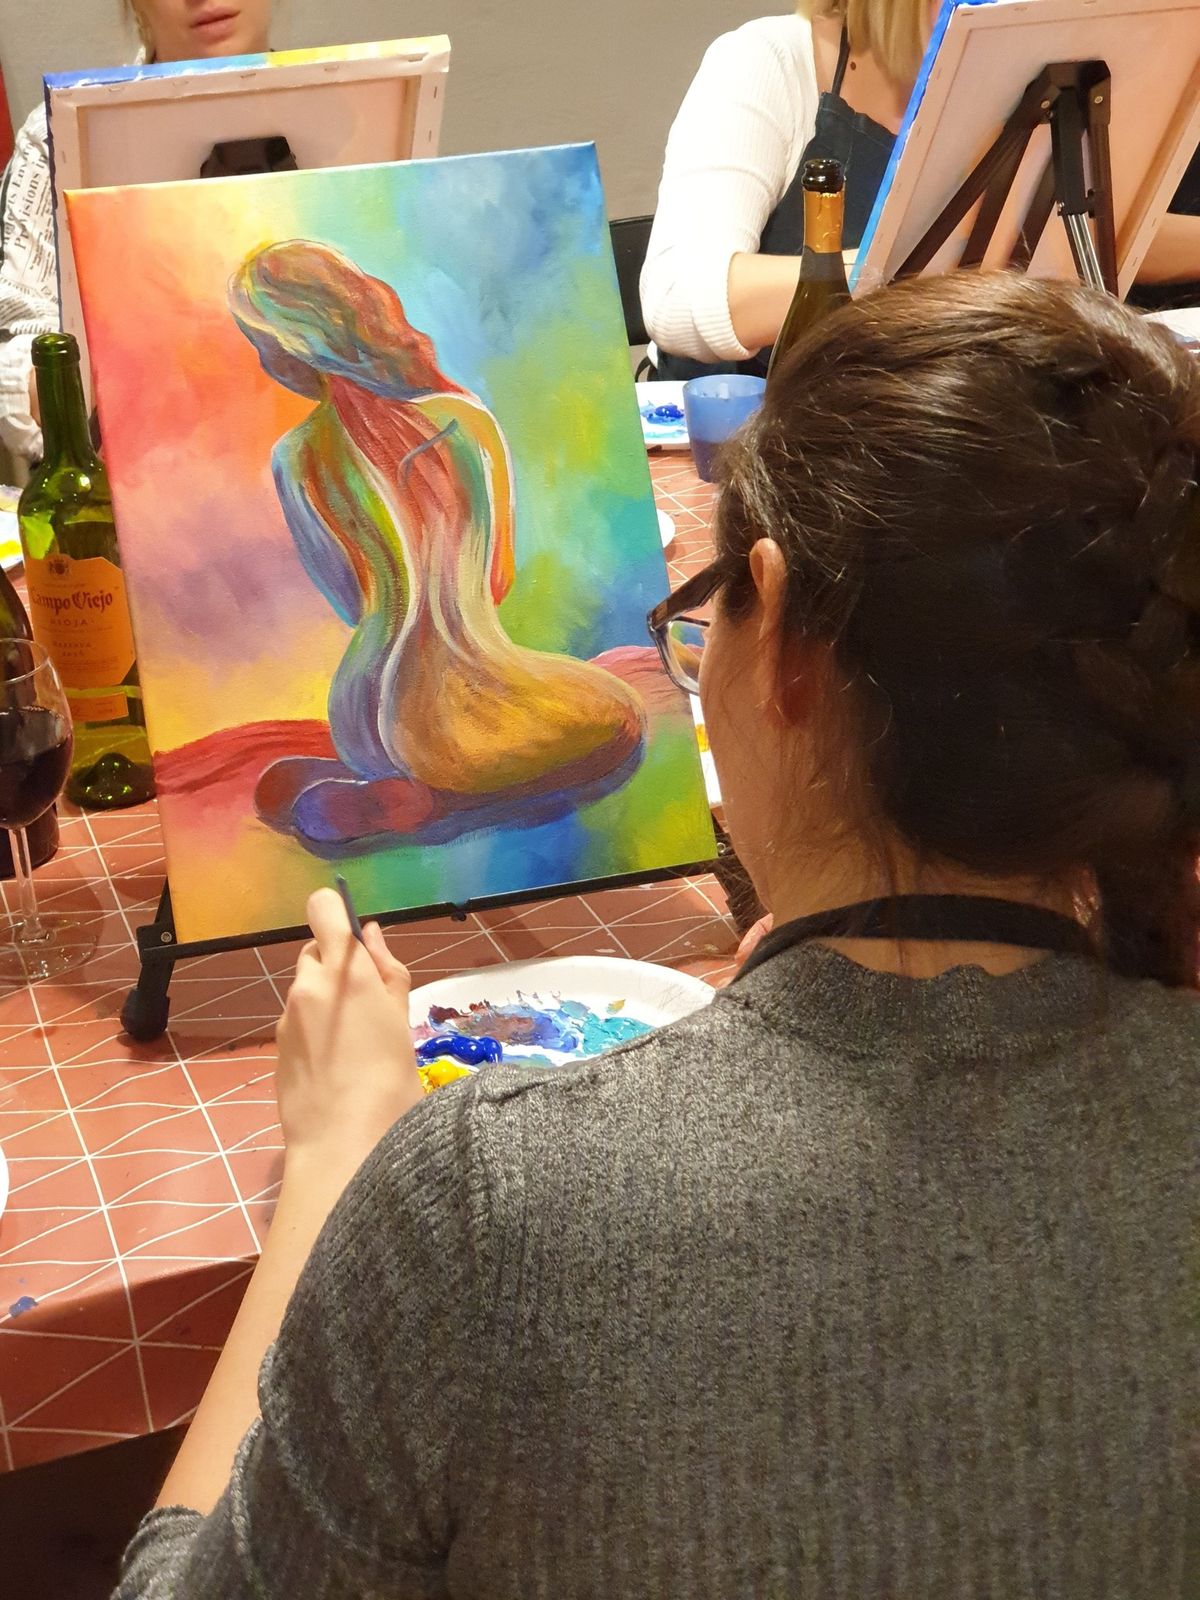 SIP AND CREATE: PAINT ABSTRACT LADY PAINTING